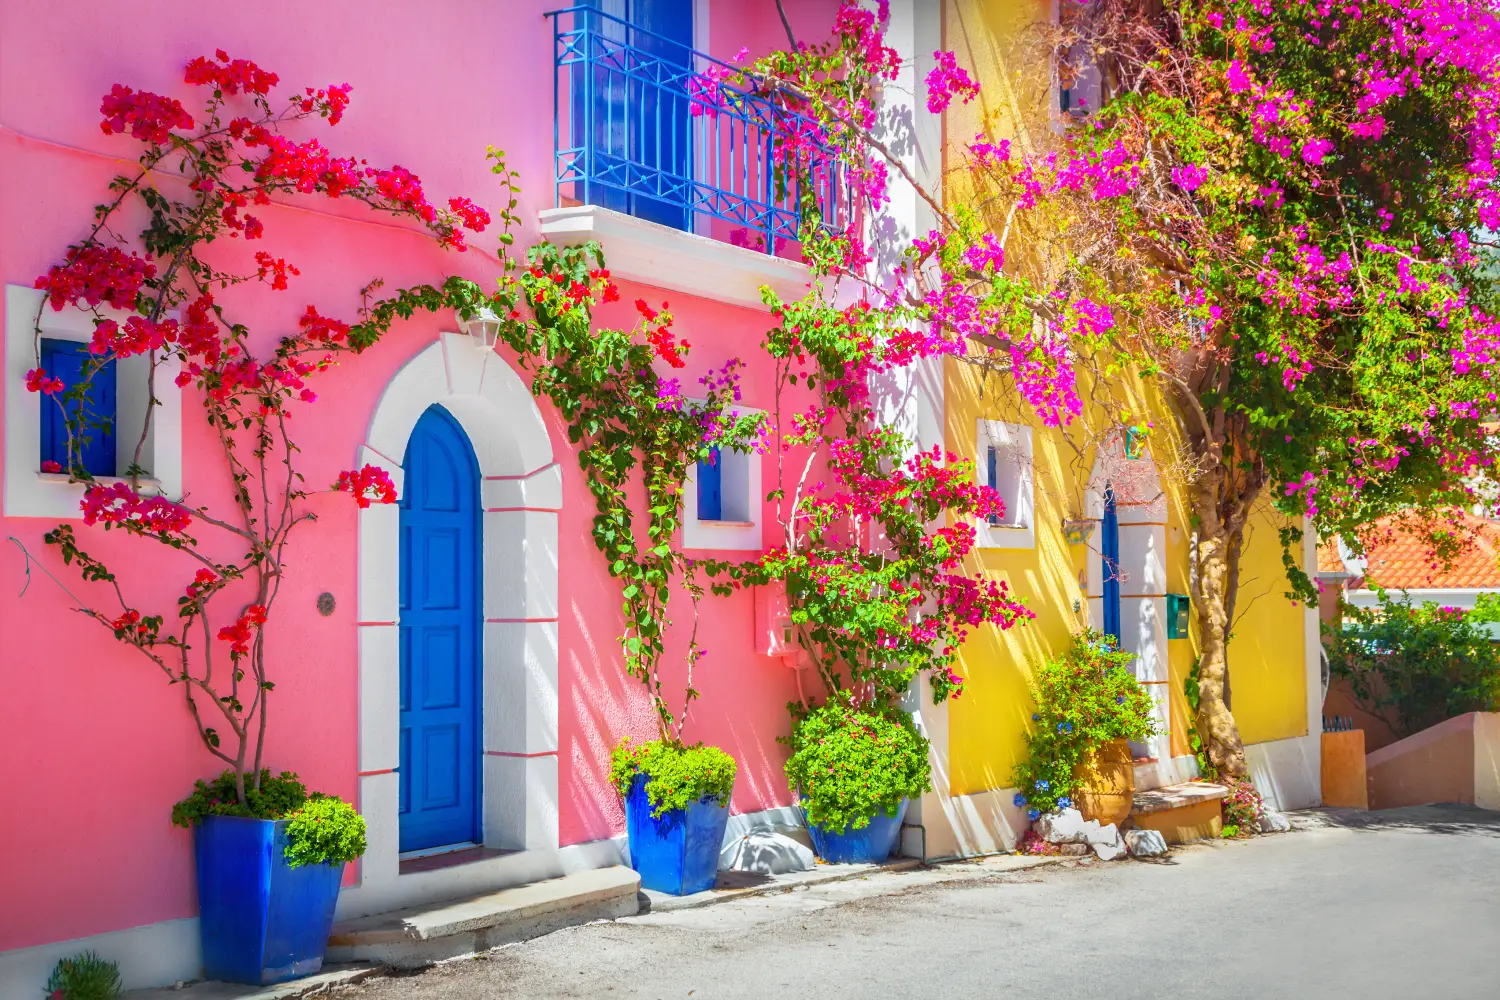 Ferry to Kefalonia - Street in Kefalonia, Greece with a pink and a yellow house front.